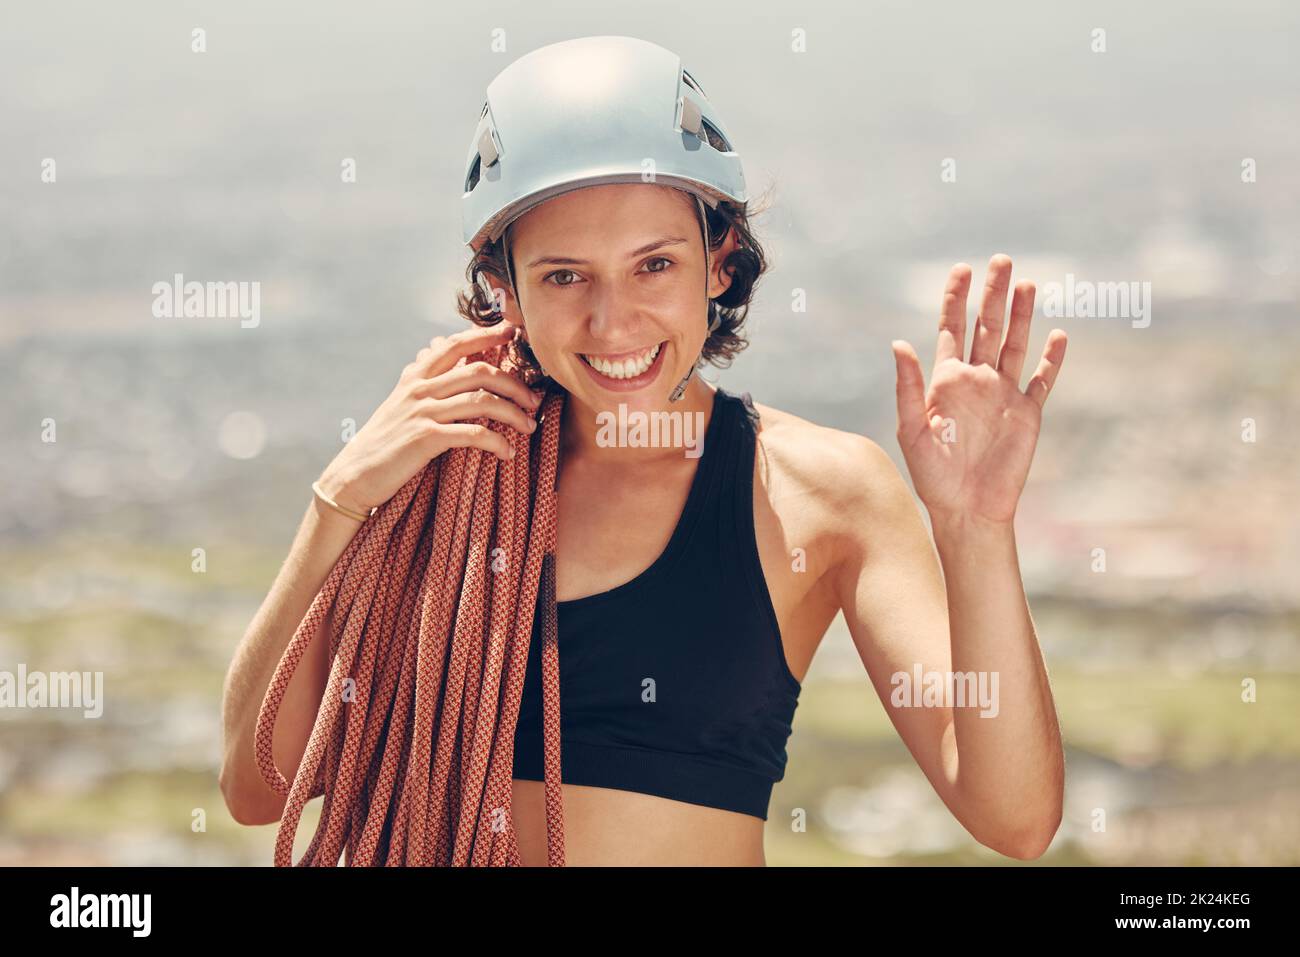 Rock climbing, rope and woman portrait happy to challenge her fitness and hiking outdoors in nature adventure. Helmet, smile and mountain climber girl Stock Photo